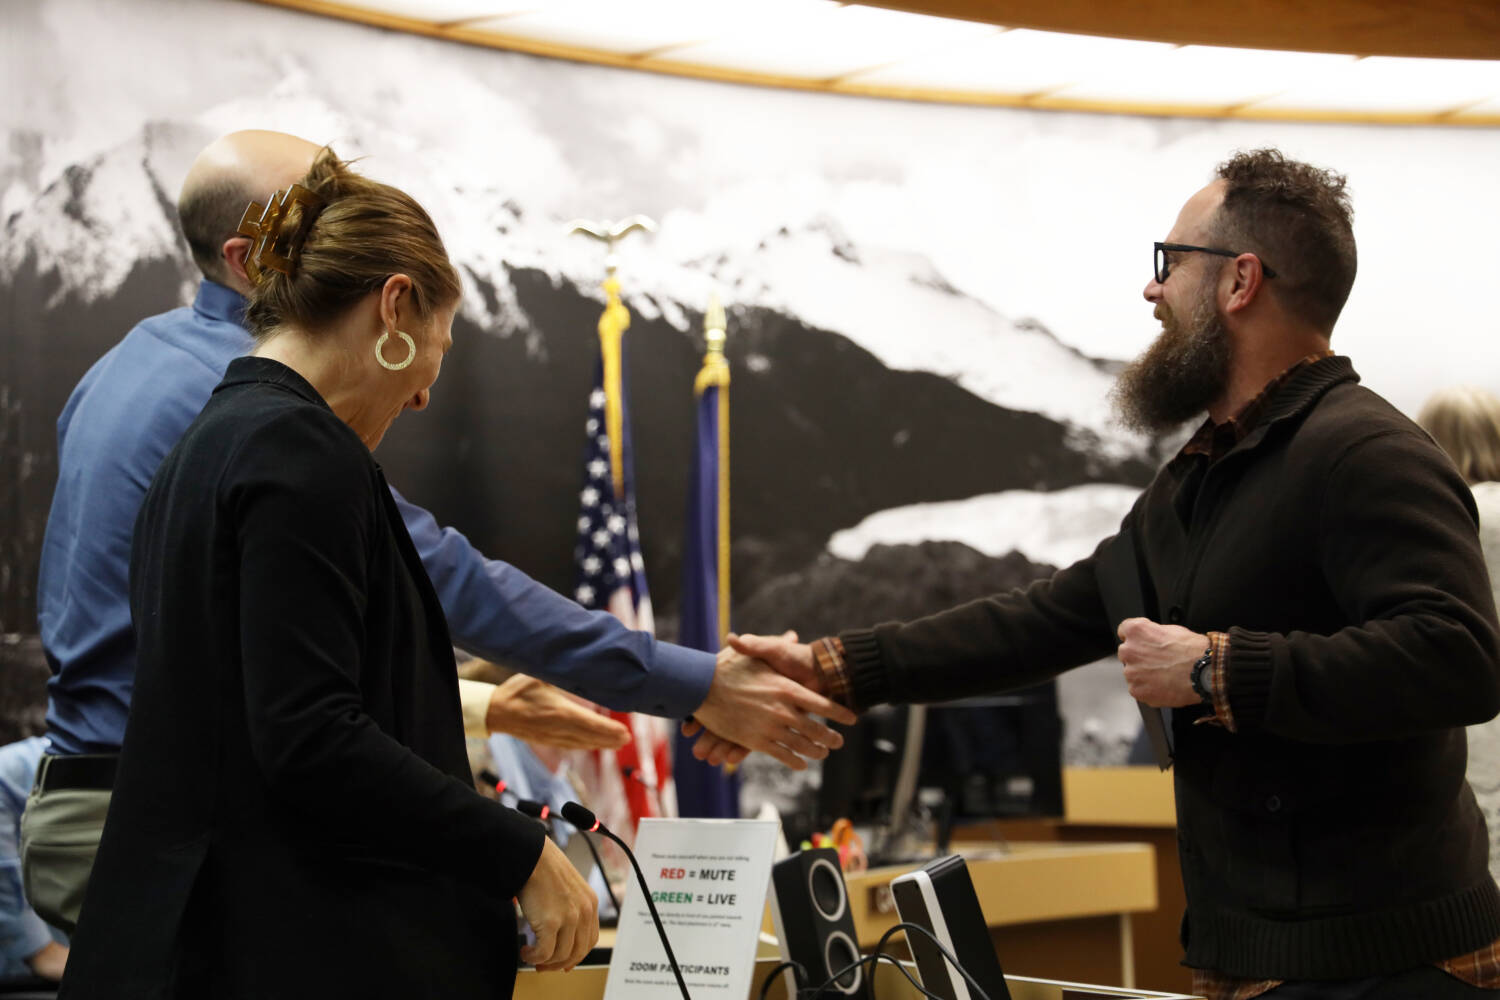 Mort Larsen shakes hands with City and Borough of Juneau Deputy City Manager Robert Barr at the Monday night Assembly meeting. Larsen, along with Mitchell McDonald were awarded a certificate of appreciation for their efforts and assistance during the Gastineau Avenue landslide. (Clarise Larson / Juneau Empire)